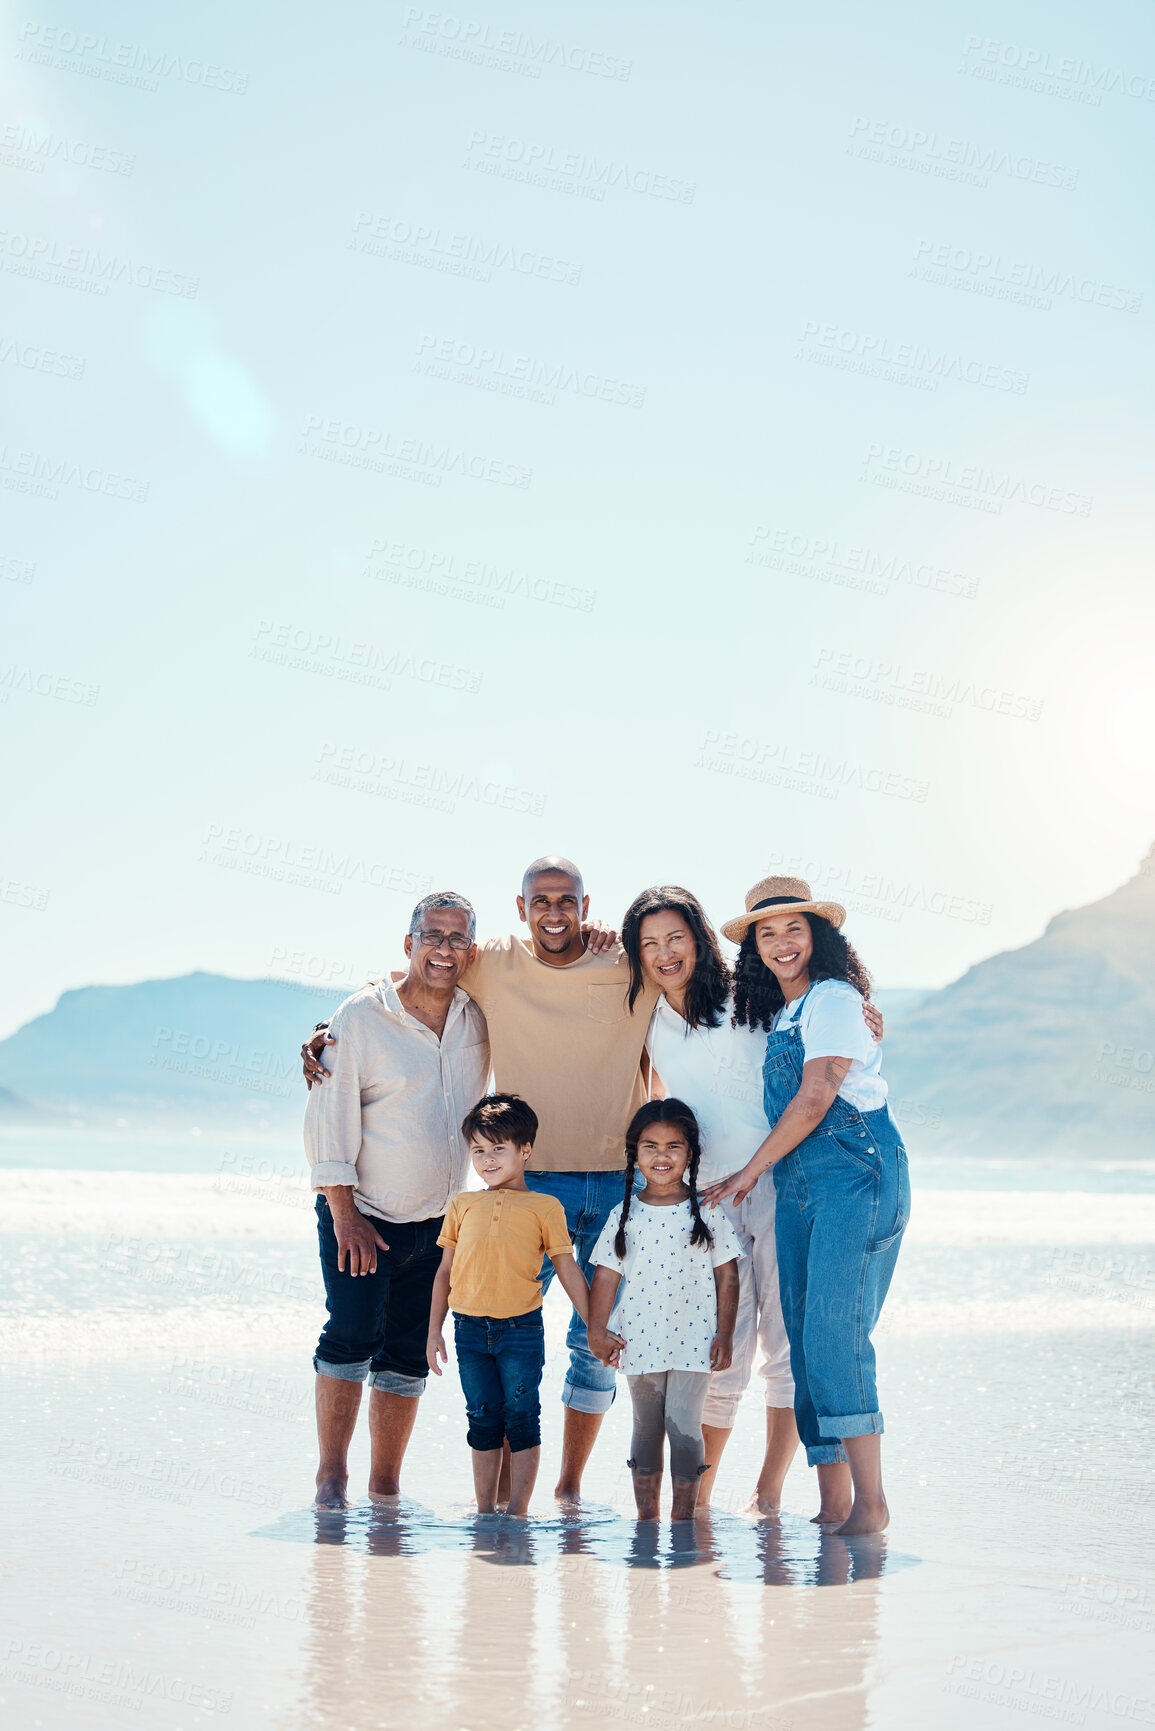 Buy stock photo Family, beach portrait and smile on vacation, bonding and love in summer sunshine by mock up space. Group, men and women with children with happiness, freedom and adventure by sea waves on holiday